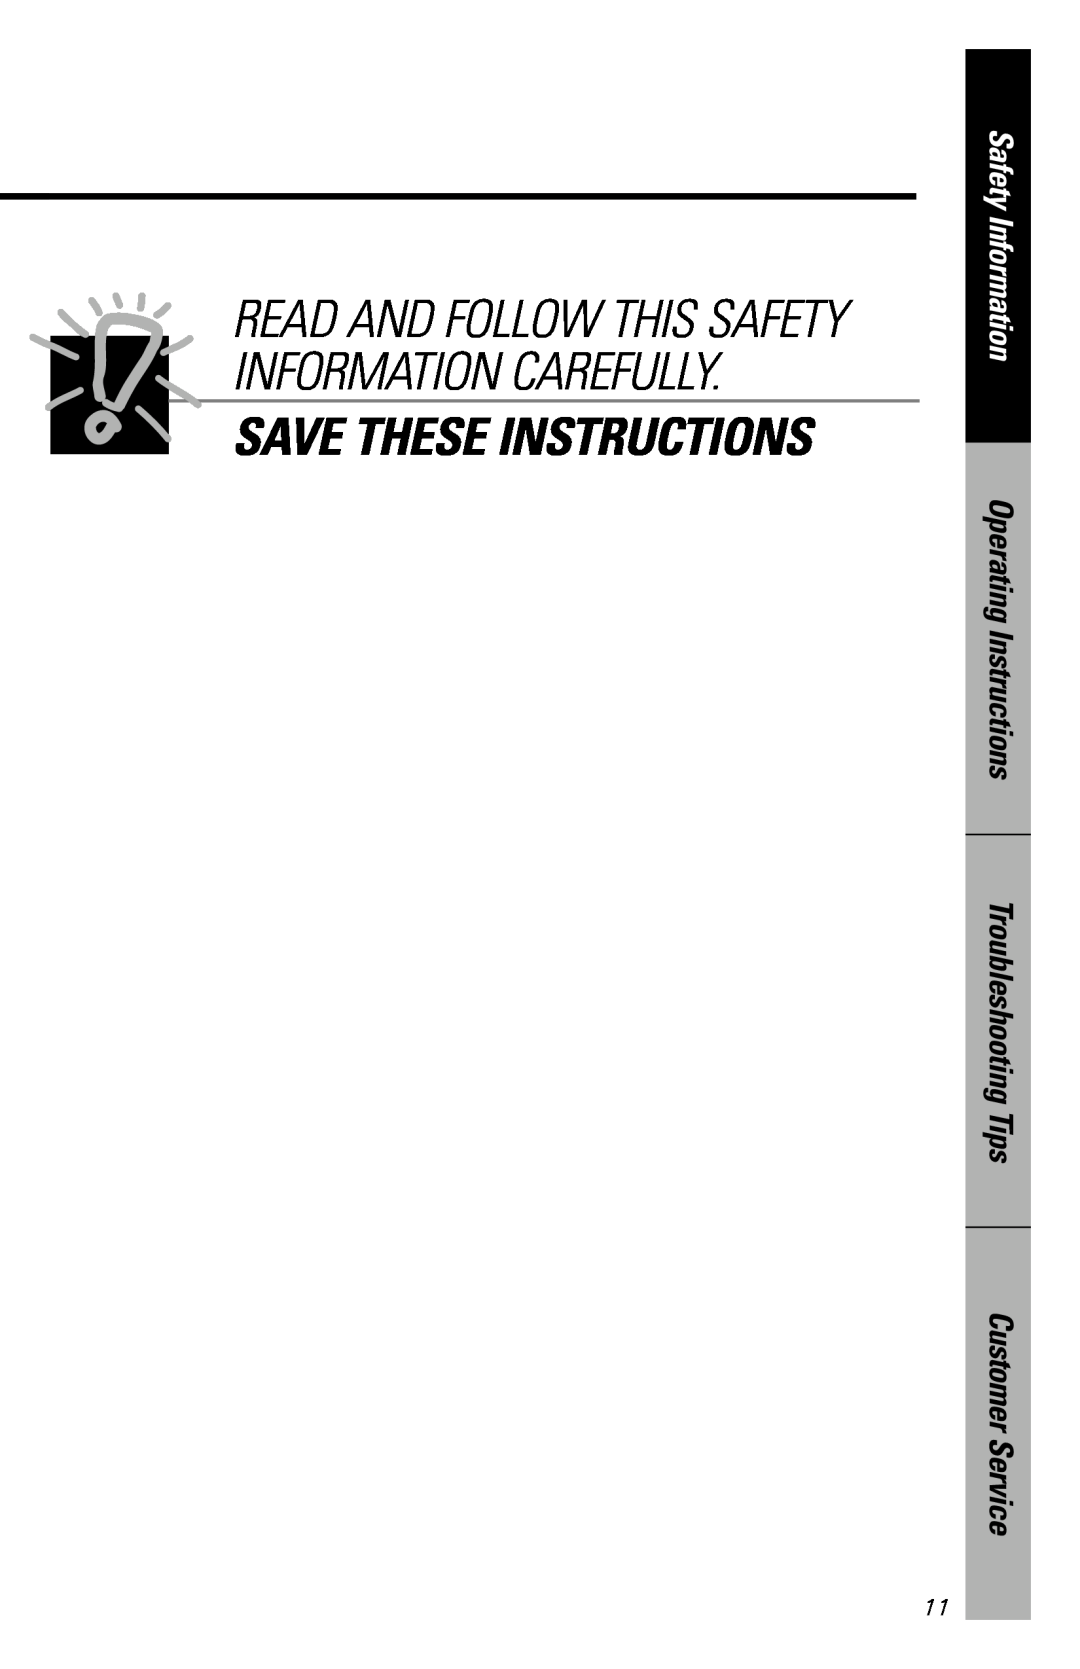 GE JE1340BC, JE1340WC owner manual Save These Instructions, Read And Follow This Safety Information Carefully 